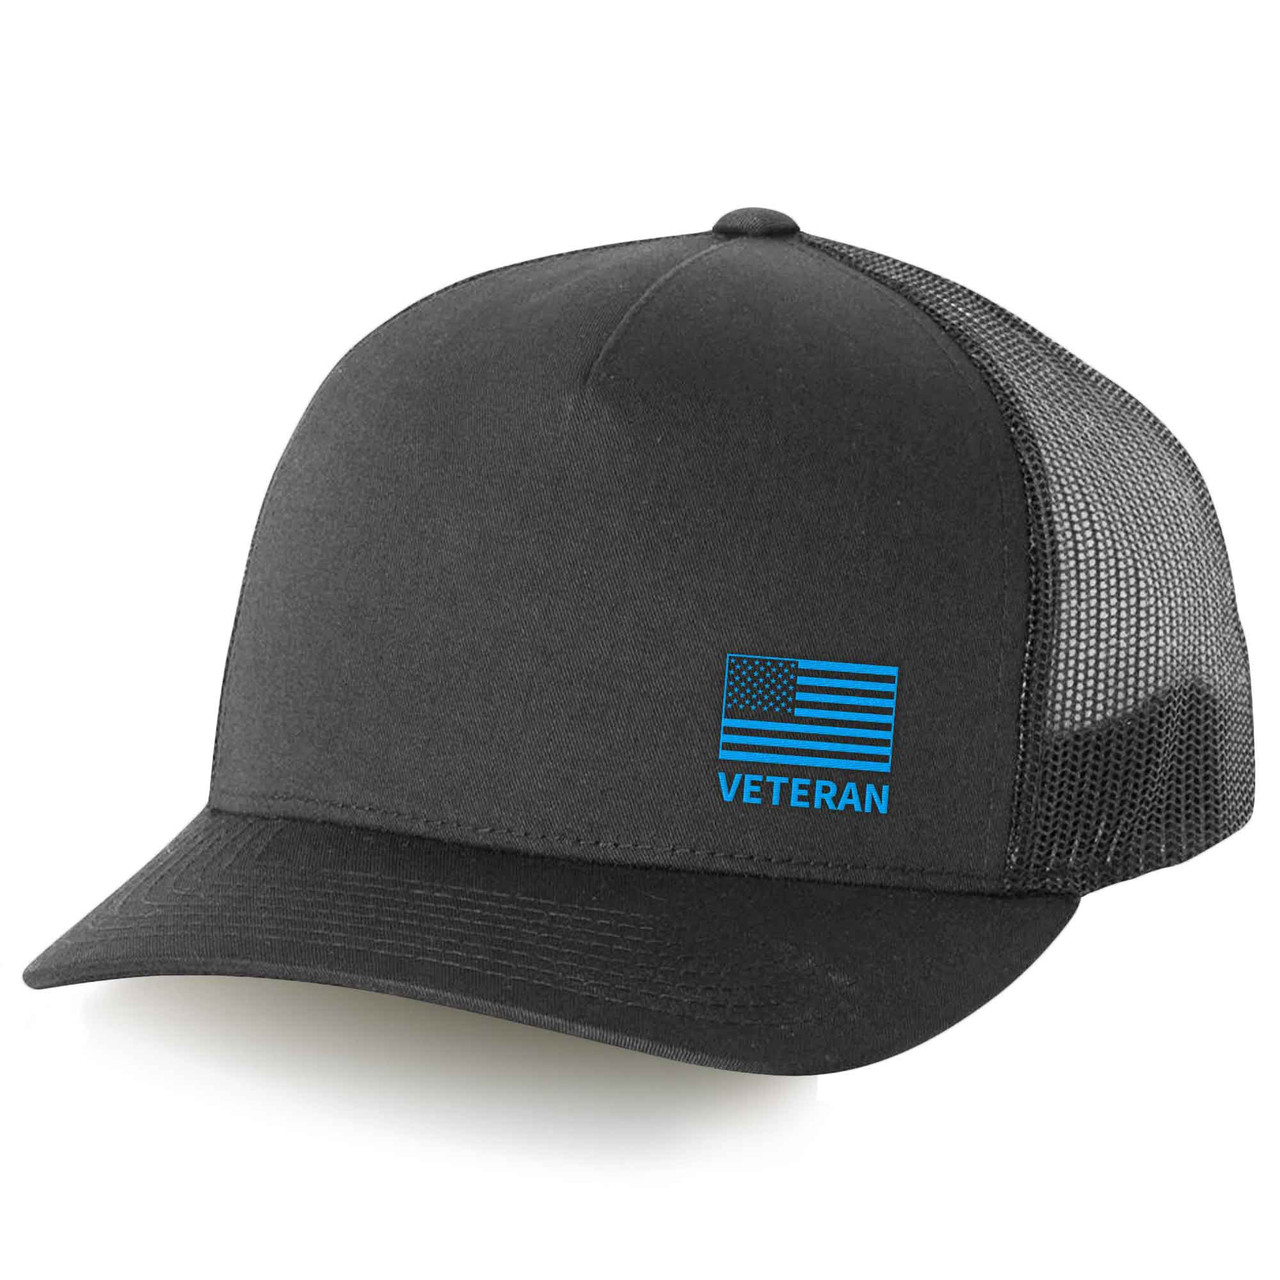 Clubhouse Classic Retro Hat with Embroidered Flag and Veteran Text- blue embroidery on charcoal hat